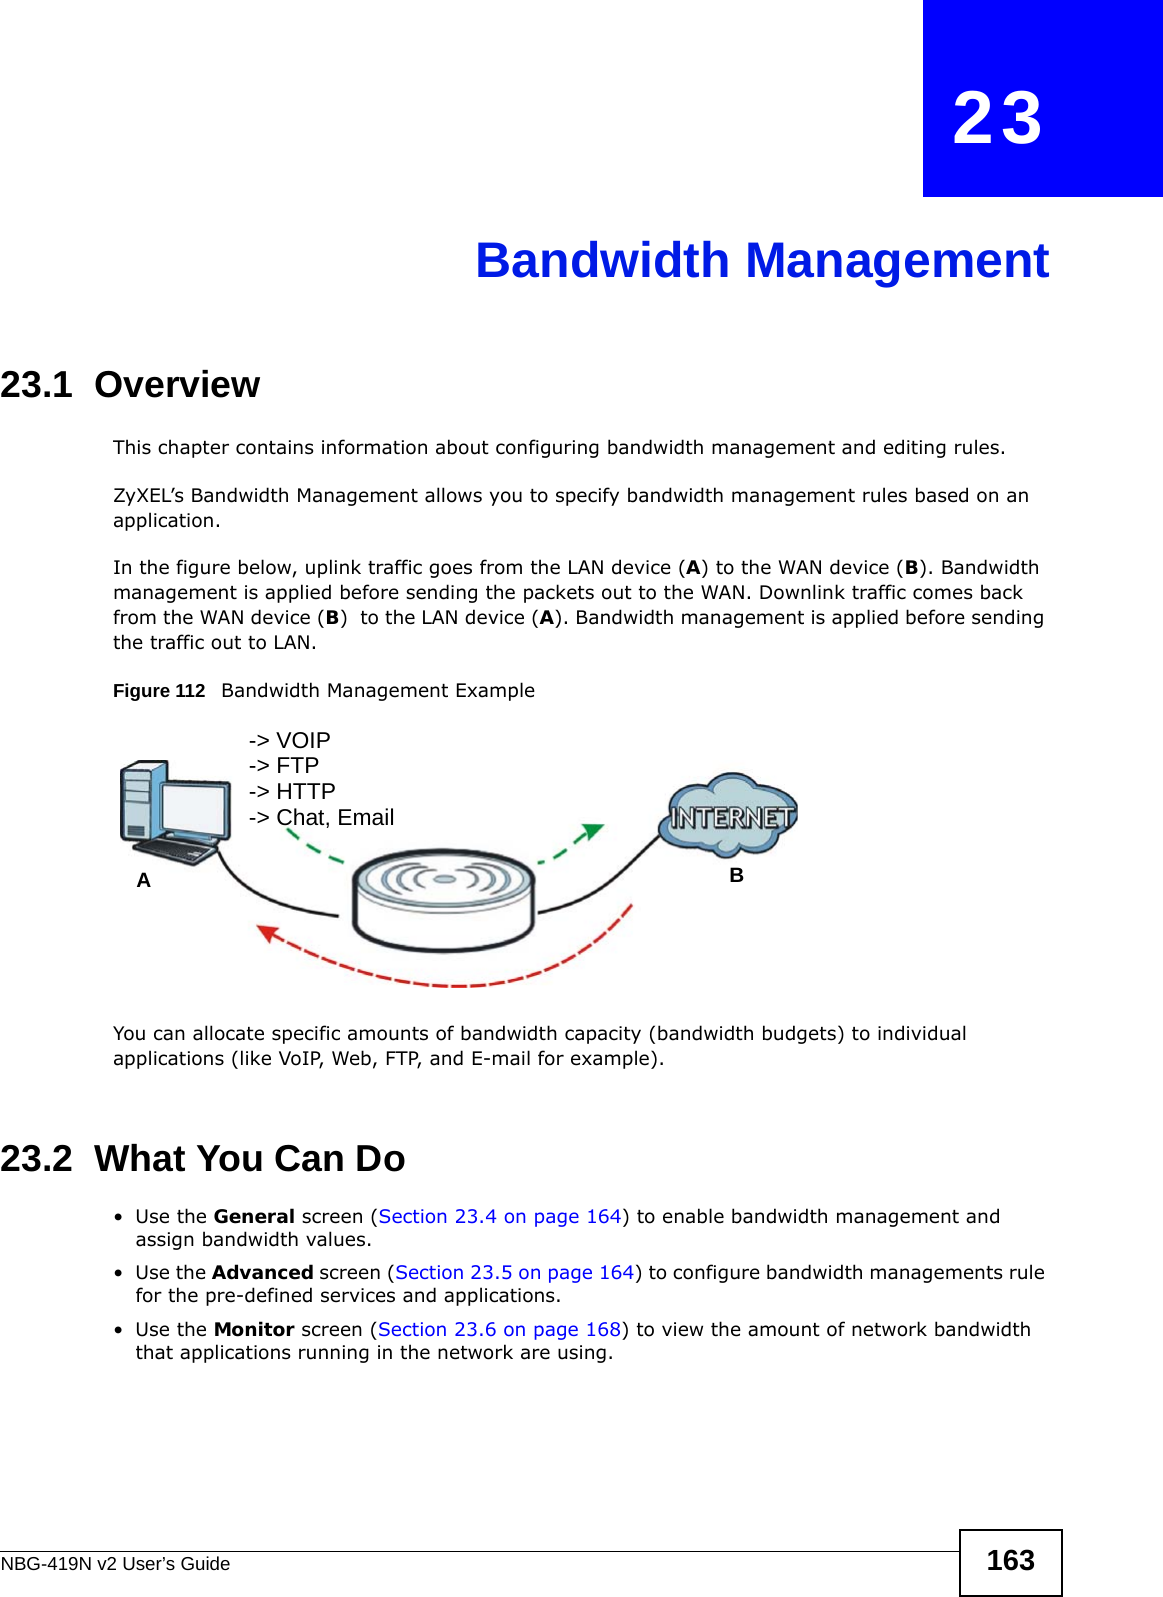 NBG-419N v2 User’s Guide 163CHAPTER   23Bandwidth Management23.1  Overview This chapter contains information about configuring bandwidth management and editing rules.ZyXEL’s Bandwidth Management allows you to specify bandwidth management rules based on an application. In the figure below, uplink traffic goes from the LAN device (A) to the WAN device (B). Bandwidth management is applied before sending the packets out to the WAN. Downlink traffic comes back from the WAN device (B)  to the LAN device (A). Bandwidth management is applied before sending the traffic out to LAN.Figure 112   Bandwidth Management ExampleYou can allocate specific amounts of bandwidth capacity (bandwidth budgets) to individual applications (like VoIP, Web, FTP, and E-mail for example).23.2  What You Can Do•Use the General screen (Section 23.4 on page 164) to enable bandwidth management and assign bandwidth values.•Use the Advanced screen (Section 23.5 on page 164) to configure bandwidth managements rule for the pre-defined services and applications.•Use the Monitor screen (Section 23.6 on page 168) to view the amount of network bandwidth that applications running in the network are using.AB-&gt; VOIP-&gt; FTP-&gt; HTTP-&gt; Chat, Email